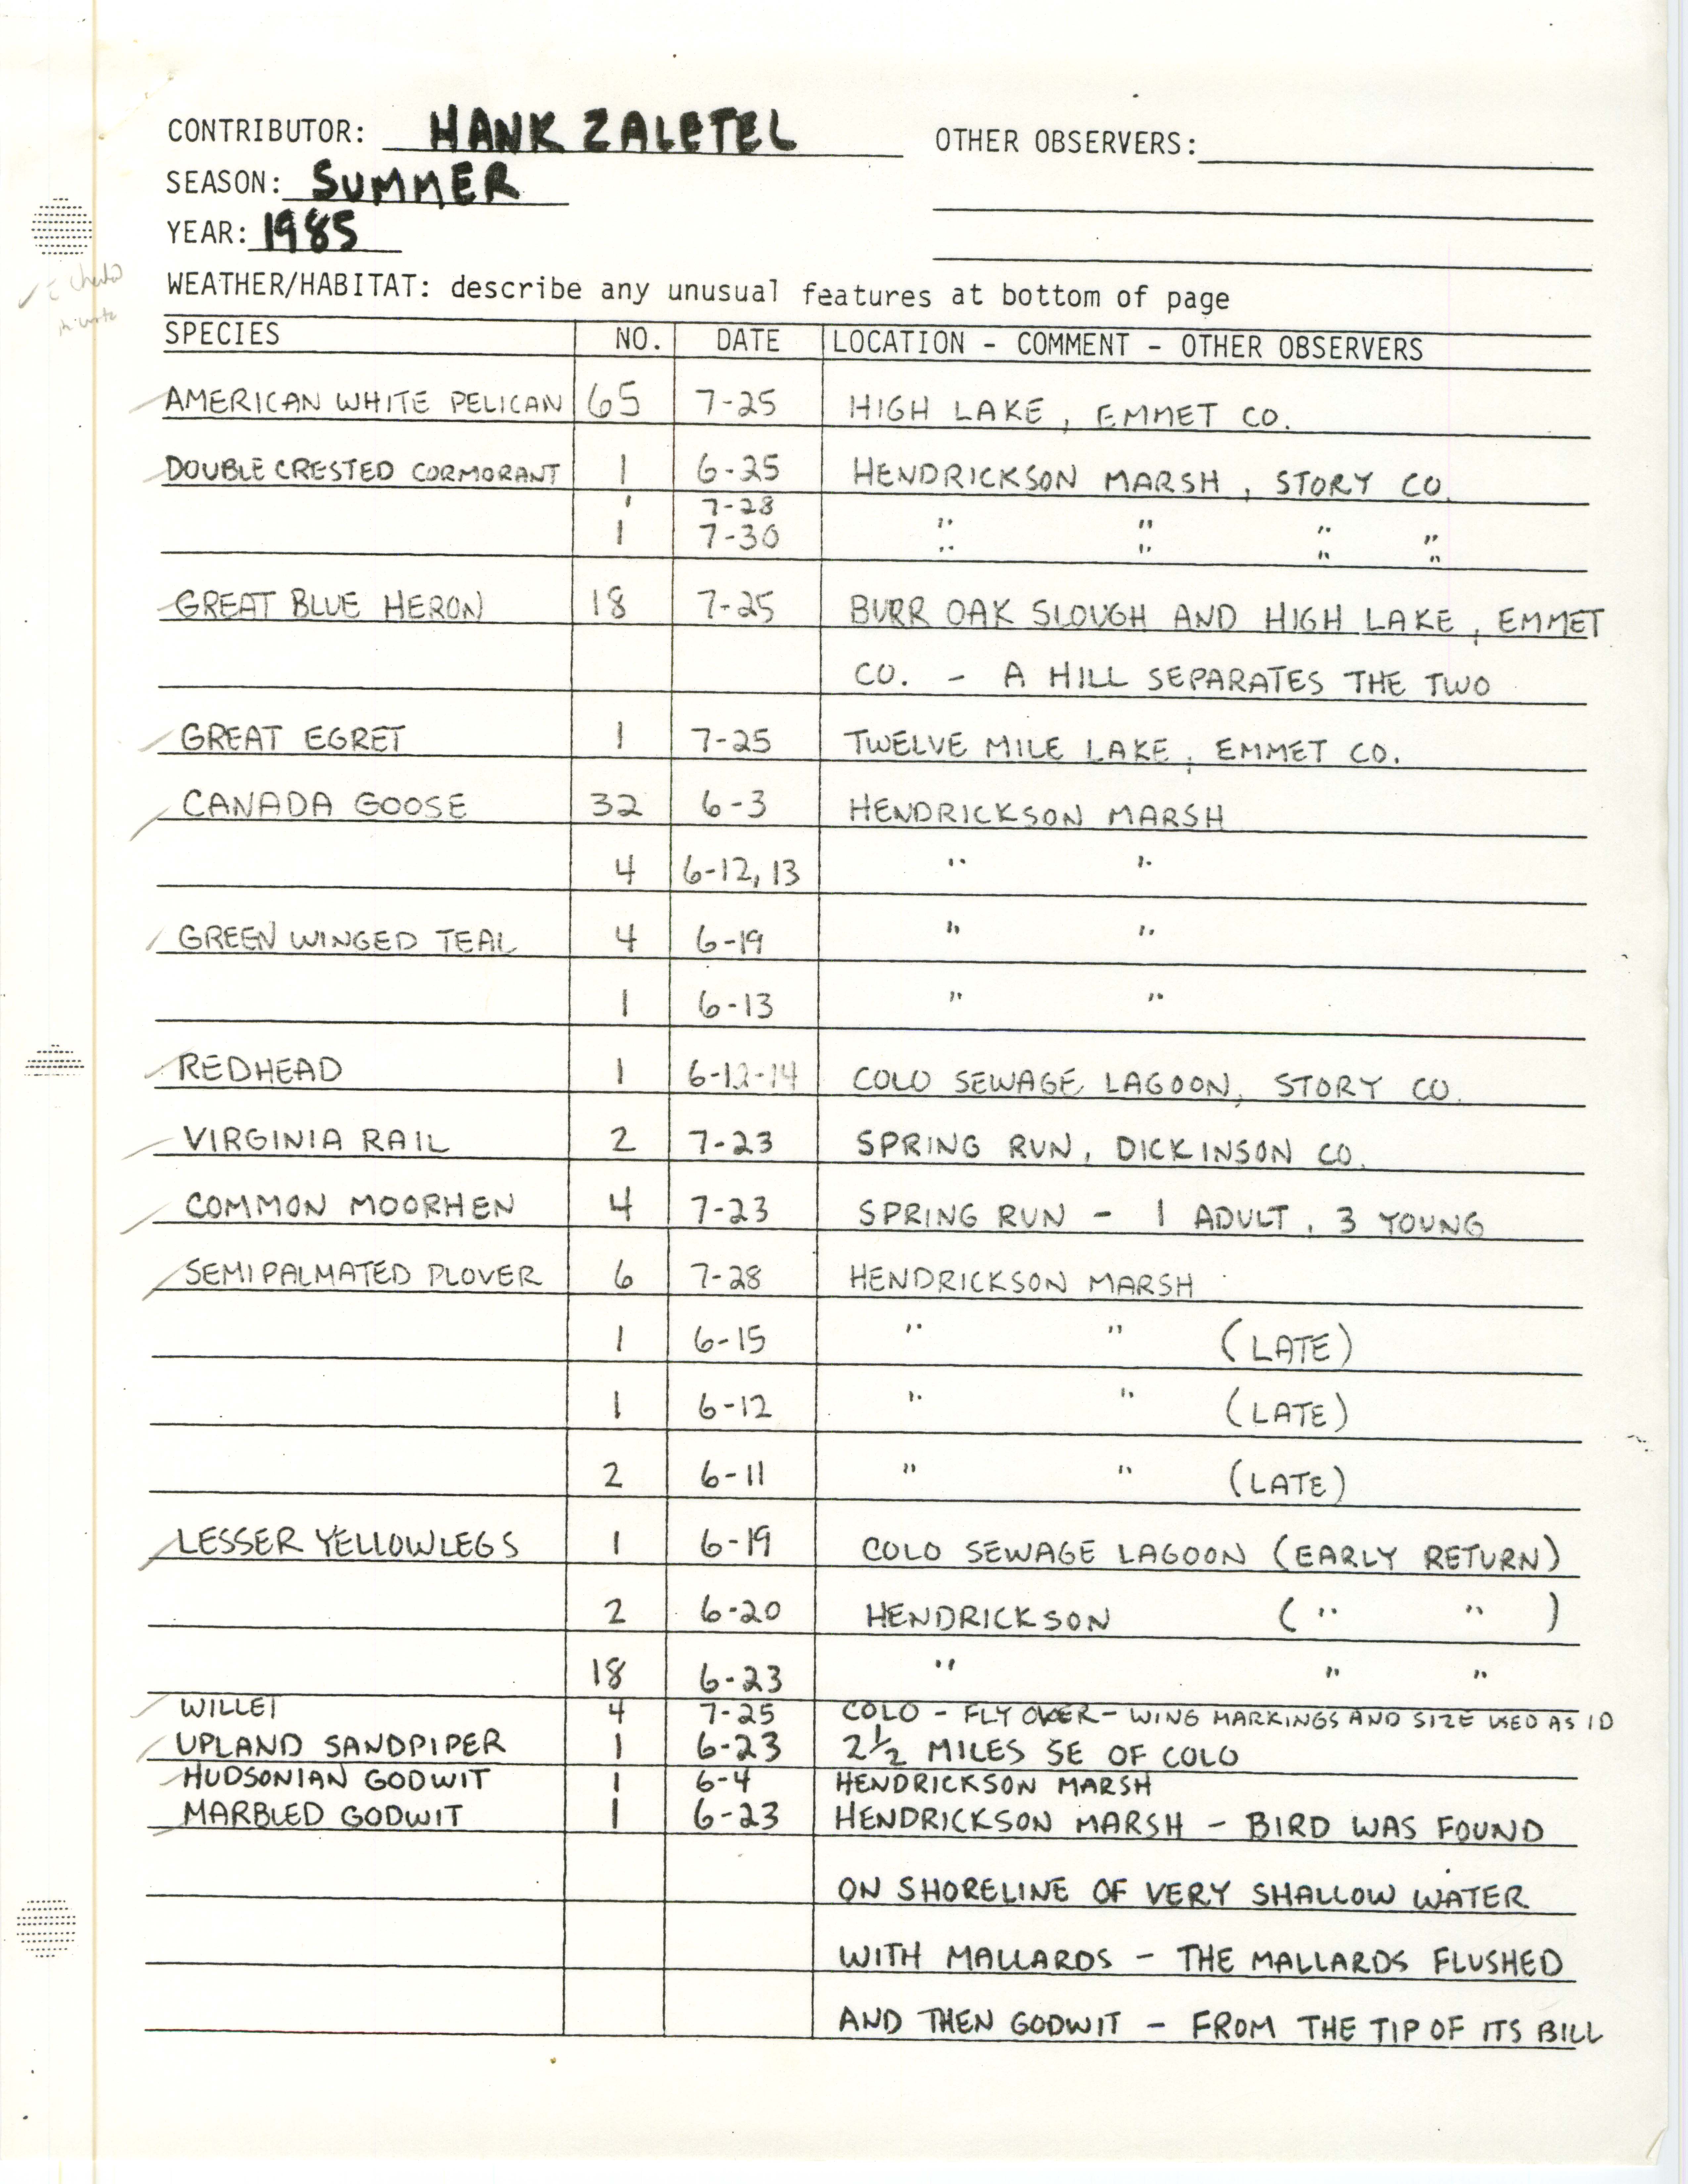 Field notes contributed by Hank Zaletel, summer 1985